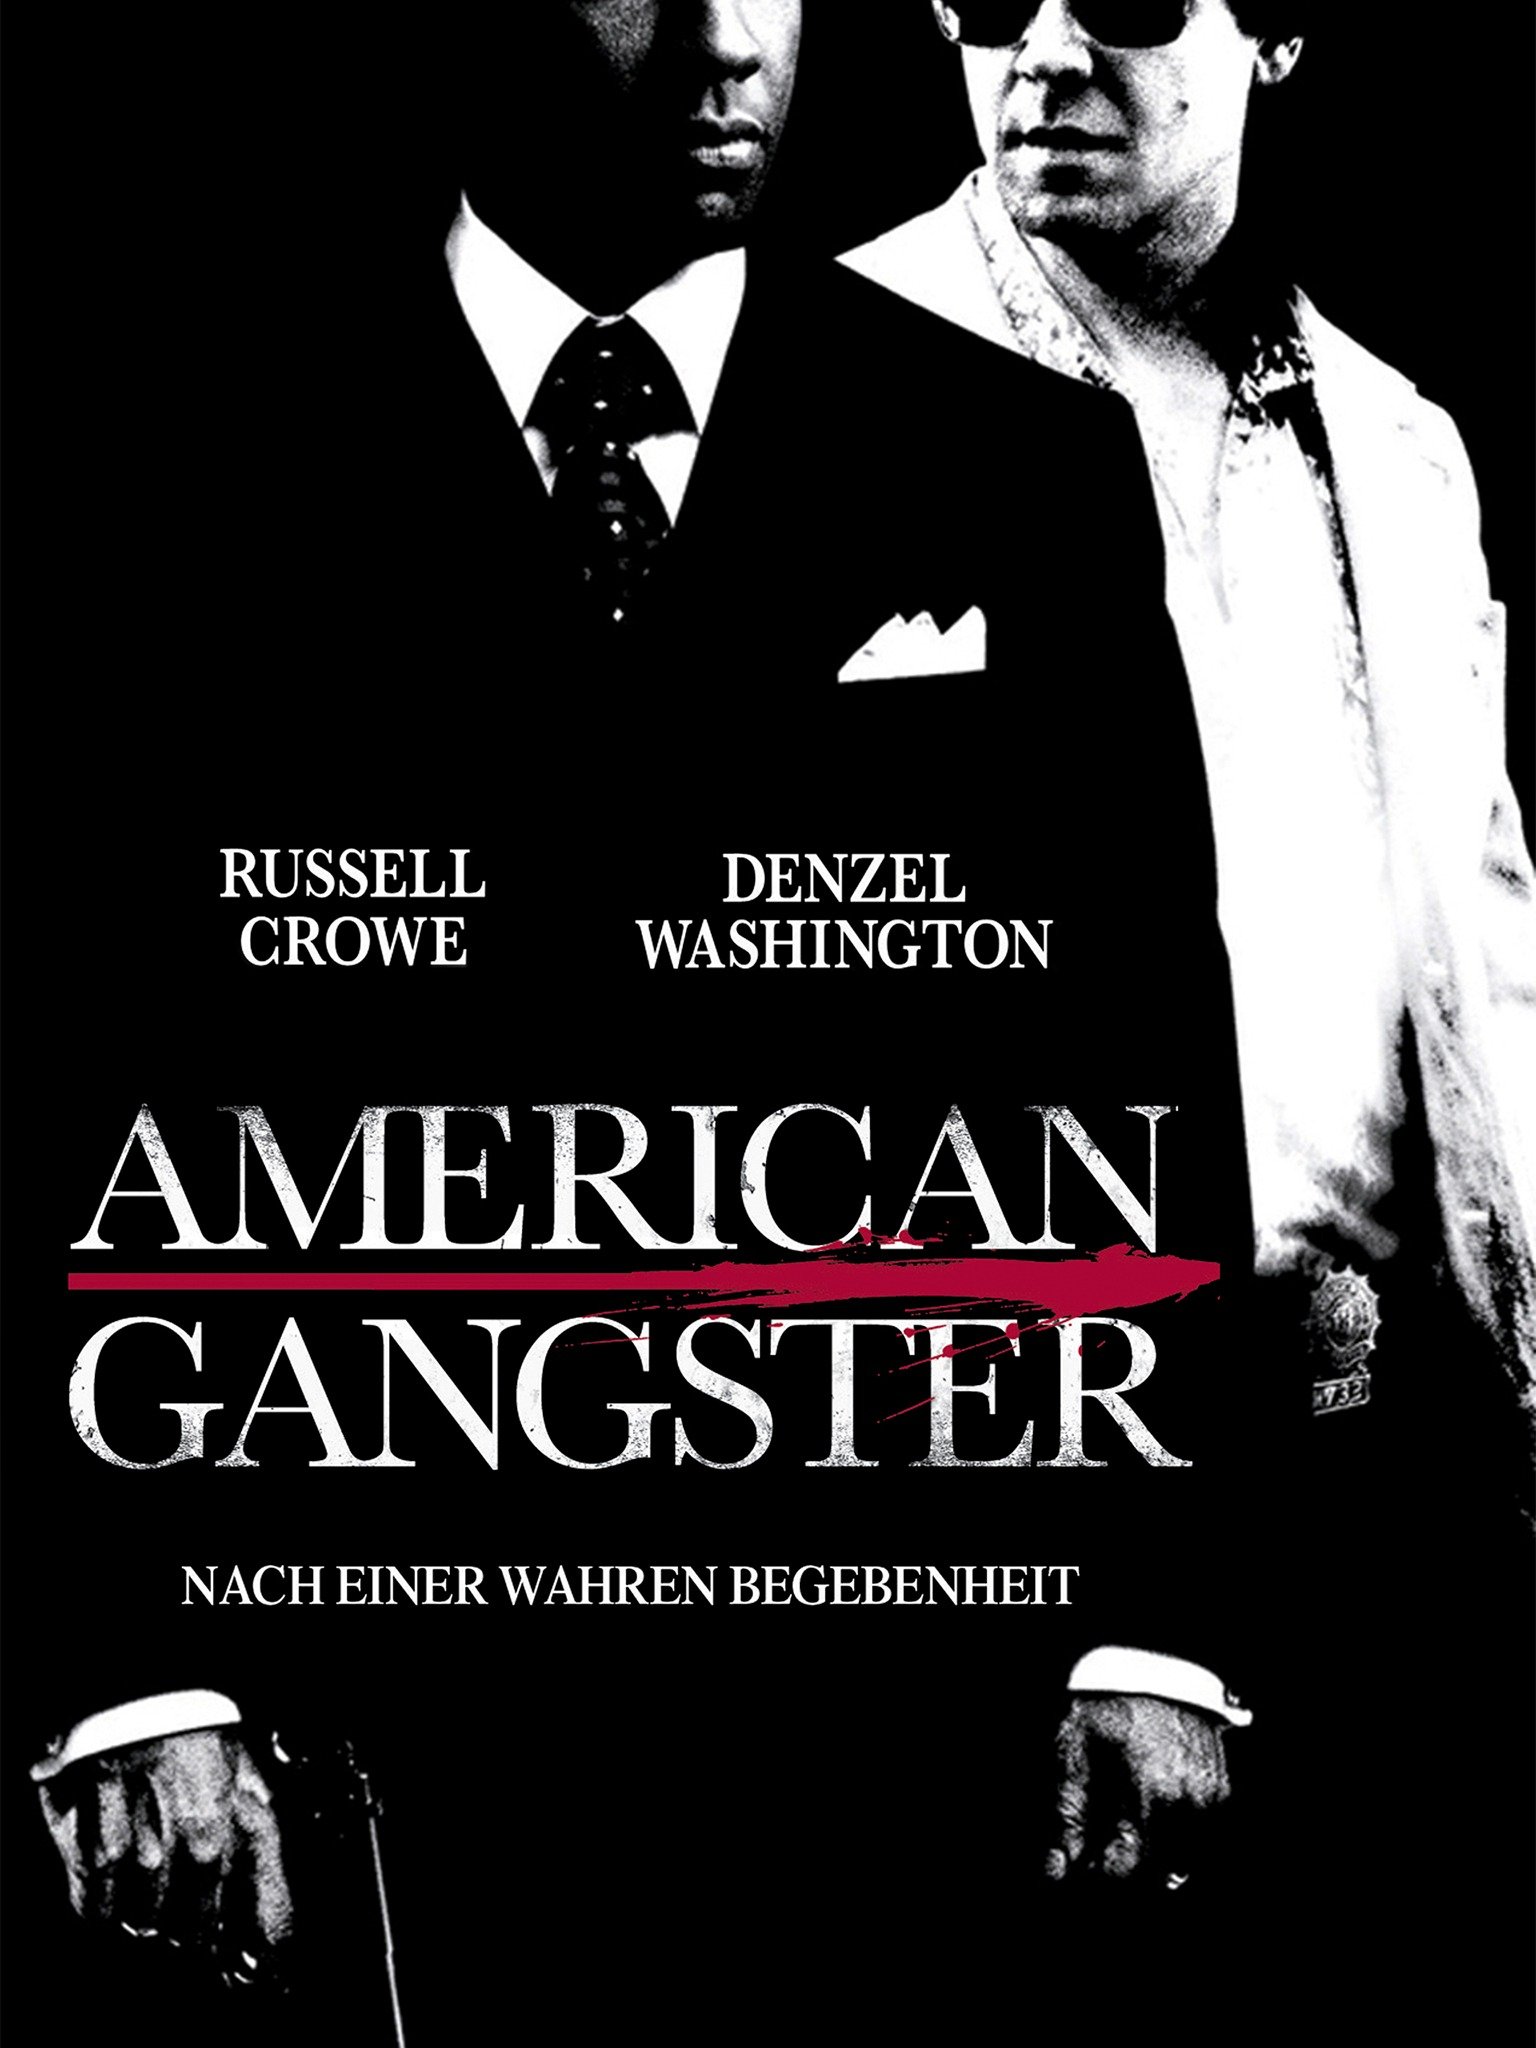 american gangster movie review rotten tomato